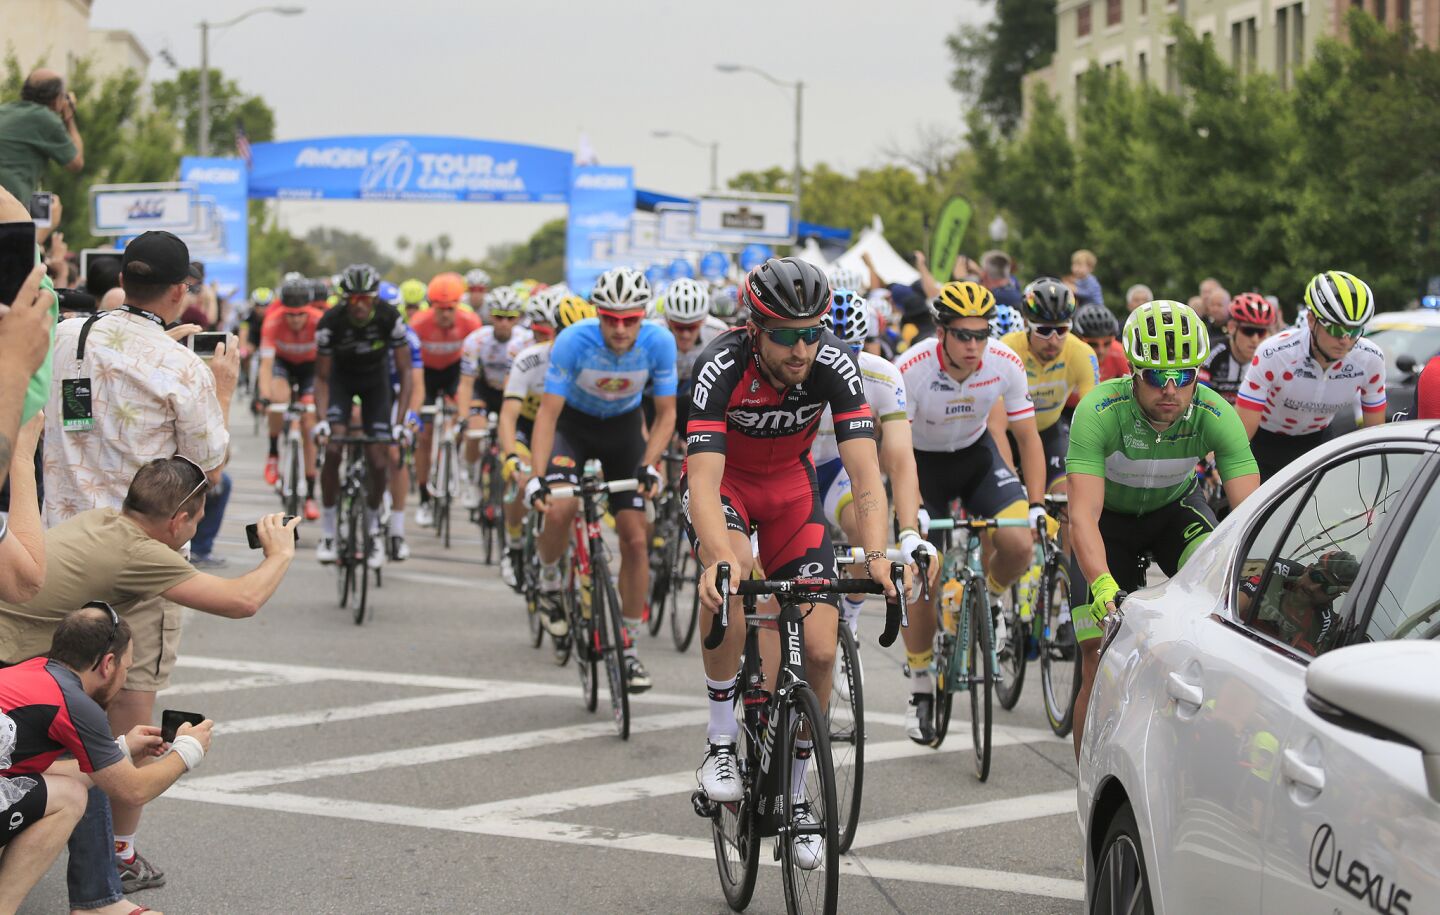 Racers start the second stage of the Amgen Tour of California in South Pasadena on May 16.